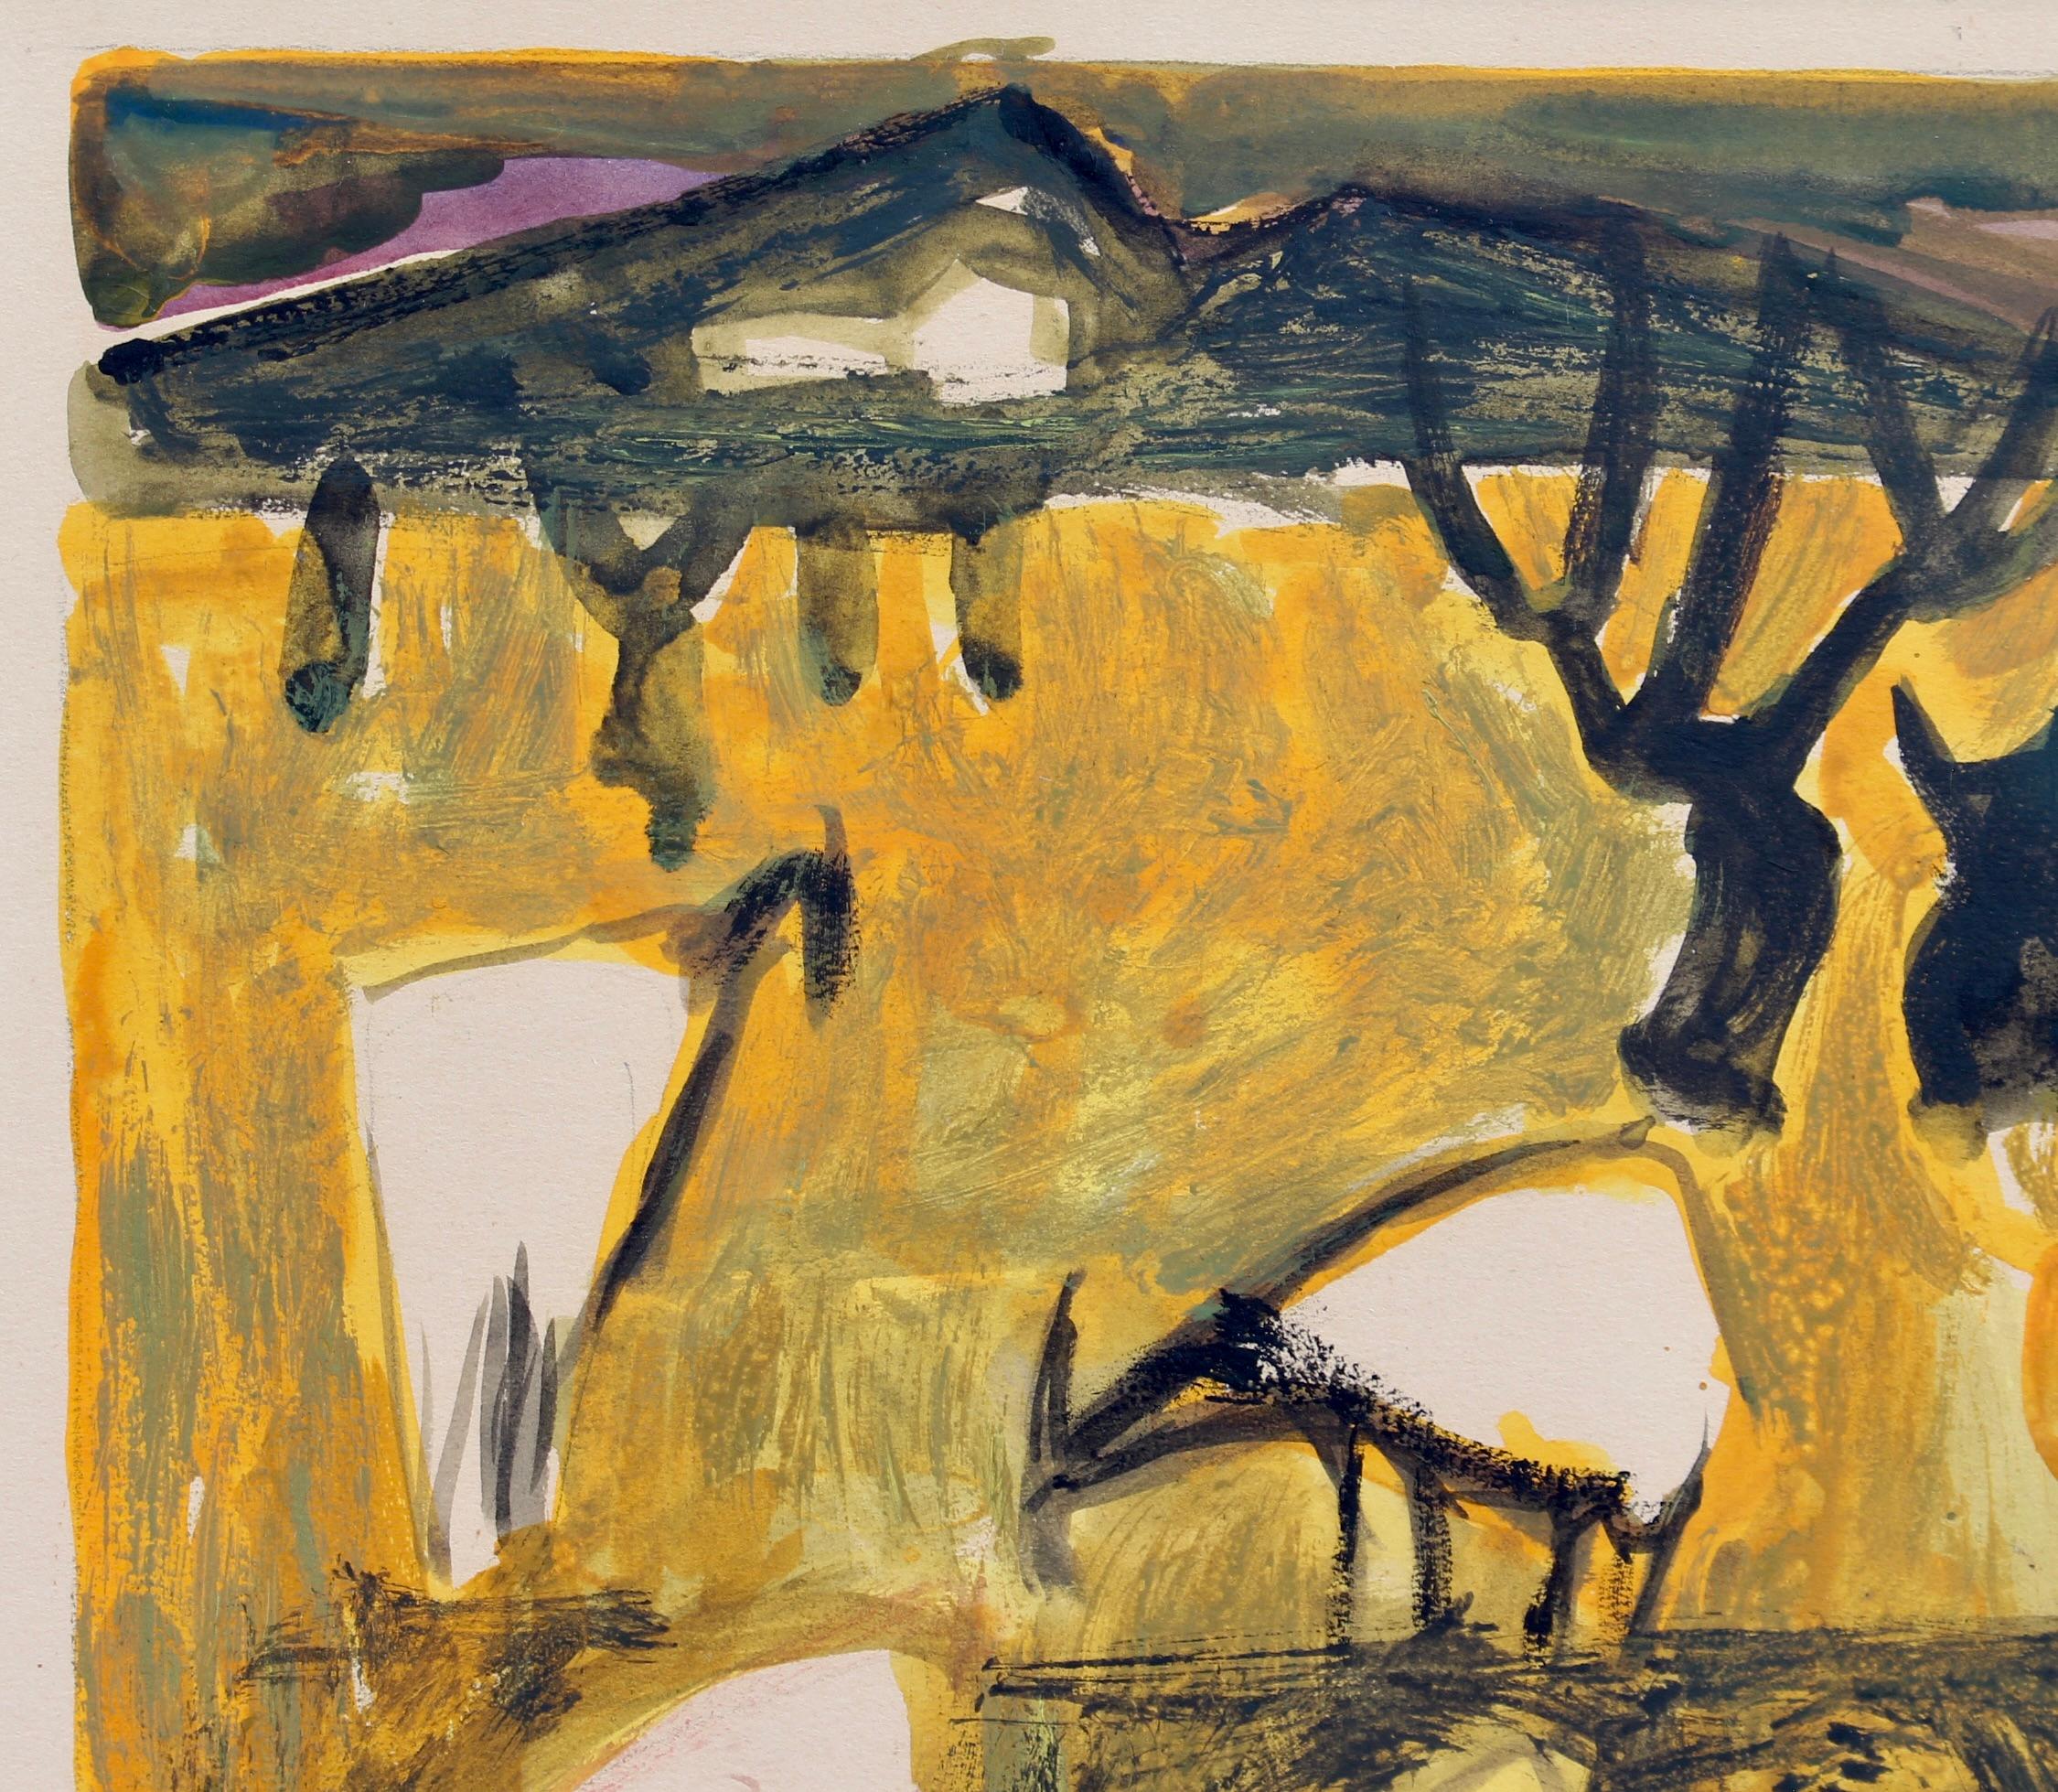 'Landscape with Man and Goats', gouache on paper, by Raymond Guerrier (circa 1960s). After the artist moved from Paris to the South of France, he started painting landscapes illuminated by the renowned Provencal light which inspired so many artists